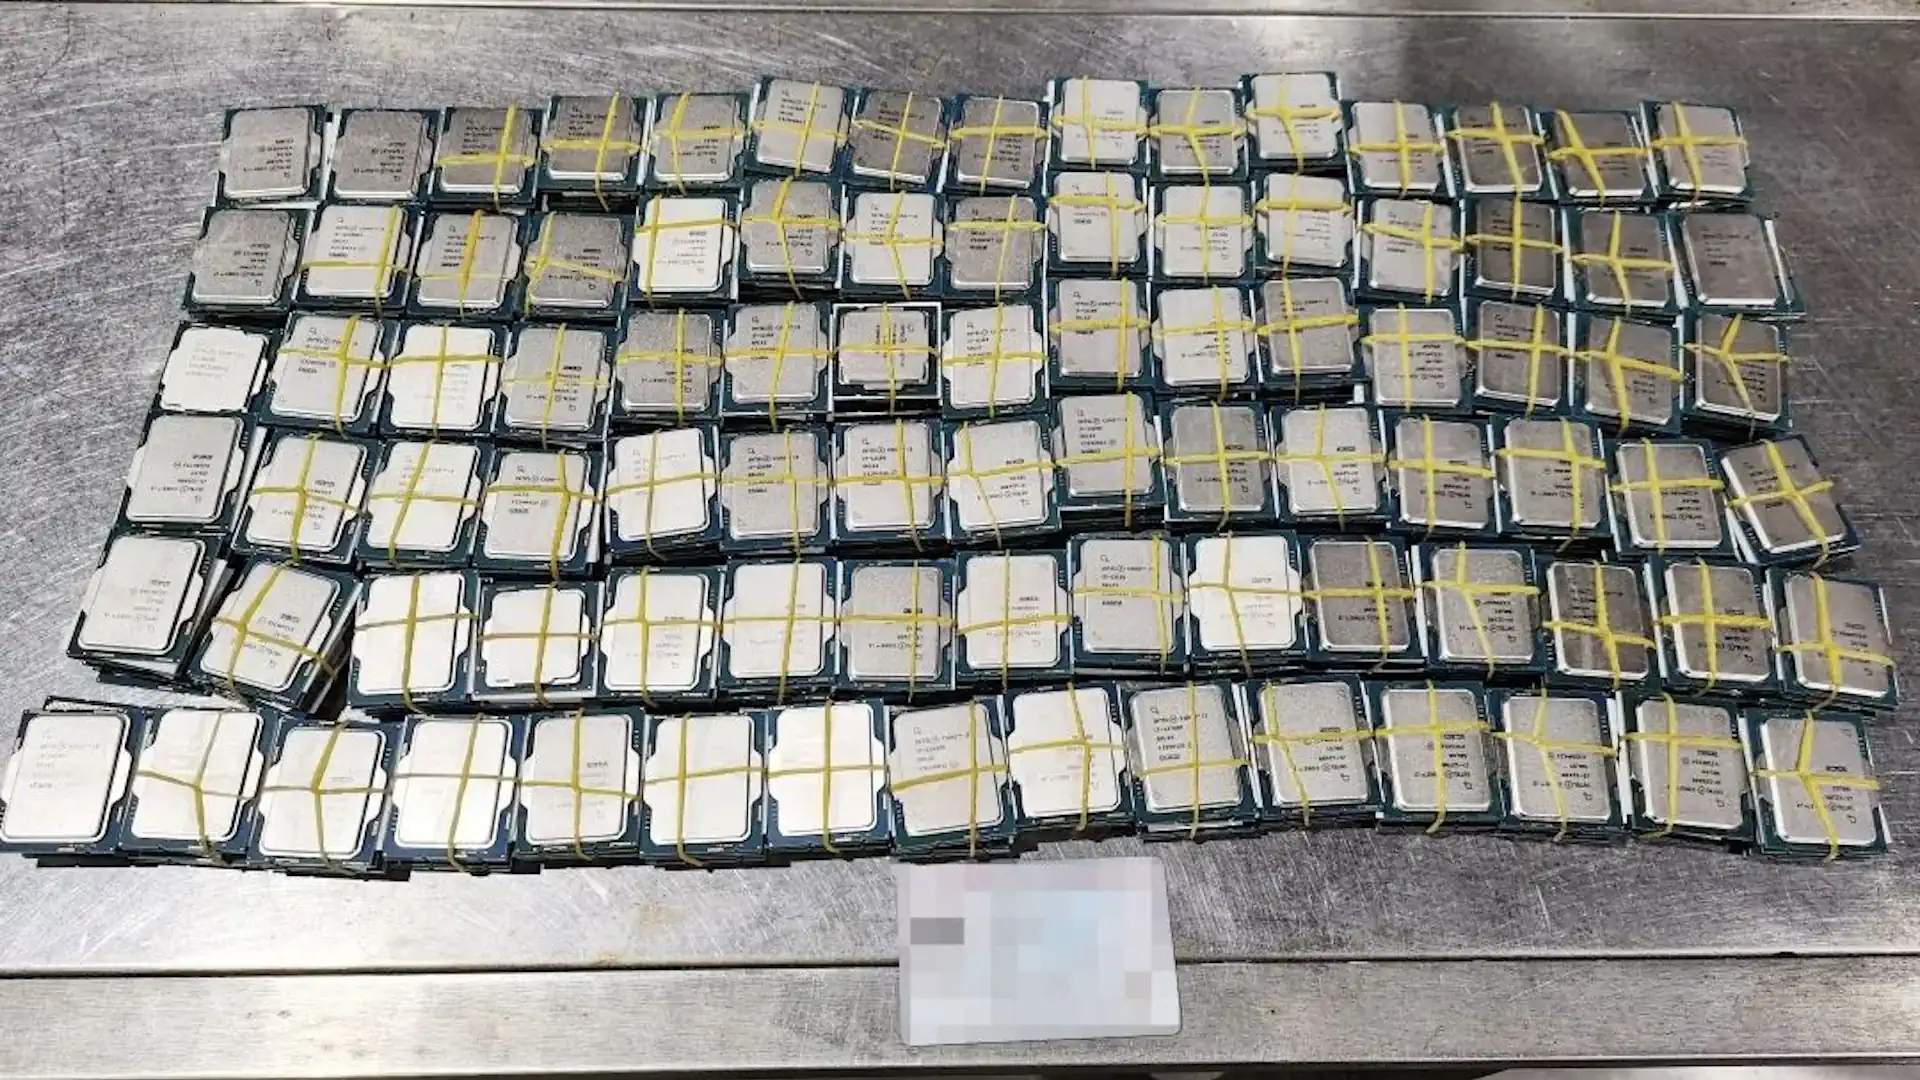 360 Intel processors hidden in bus seat rack seized at Chinese border